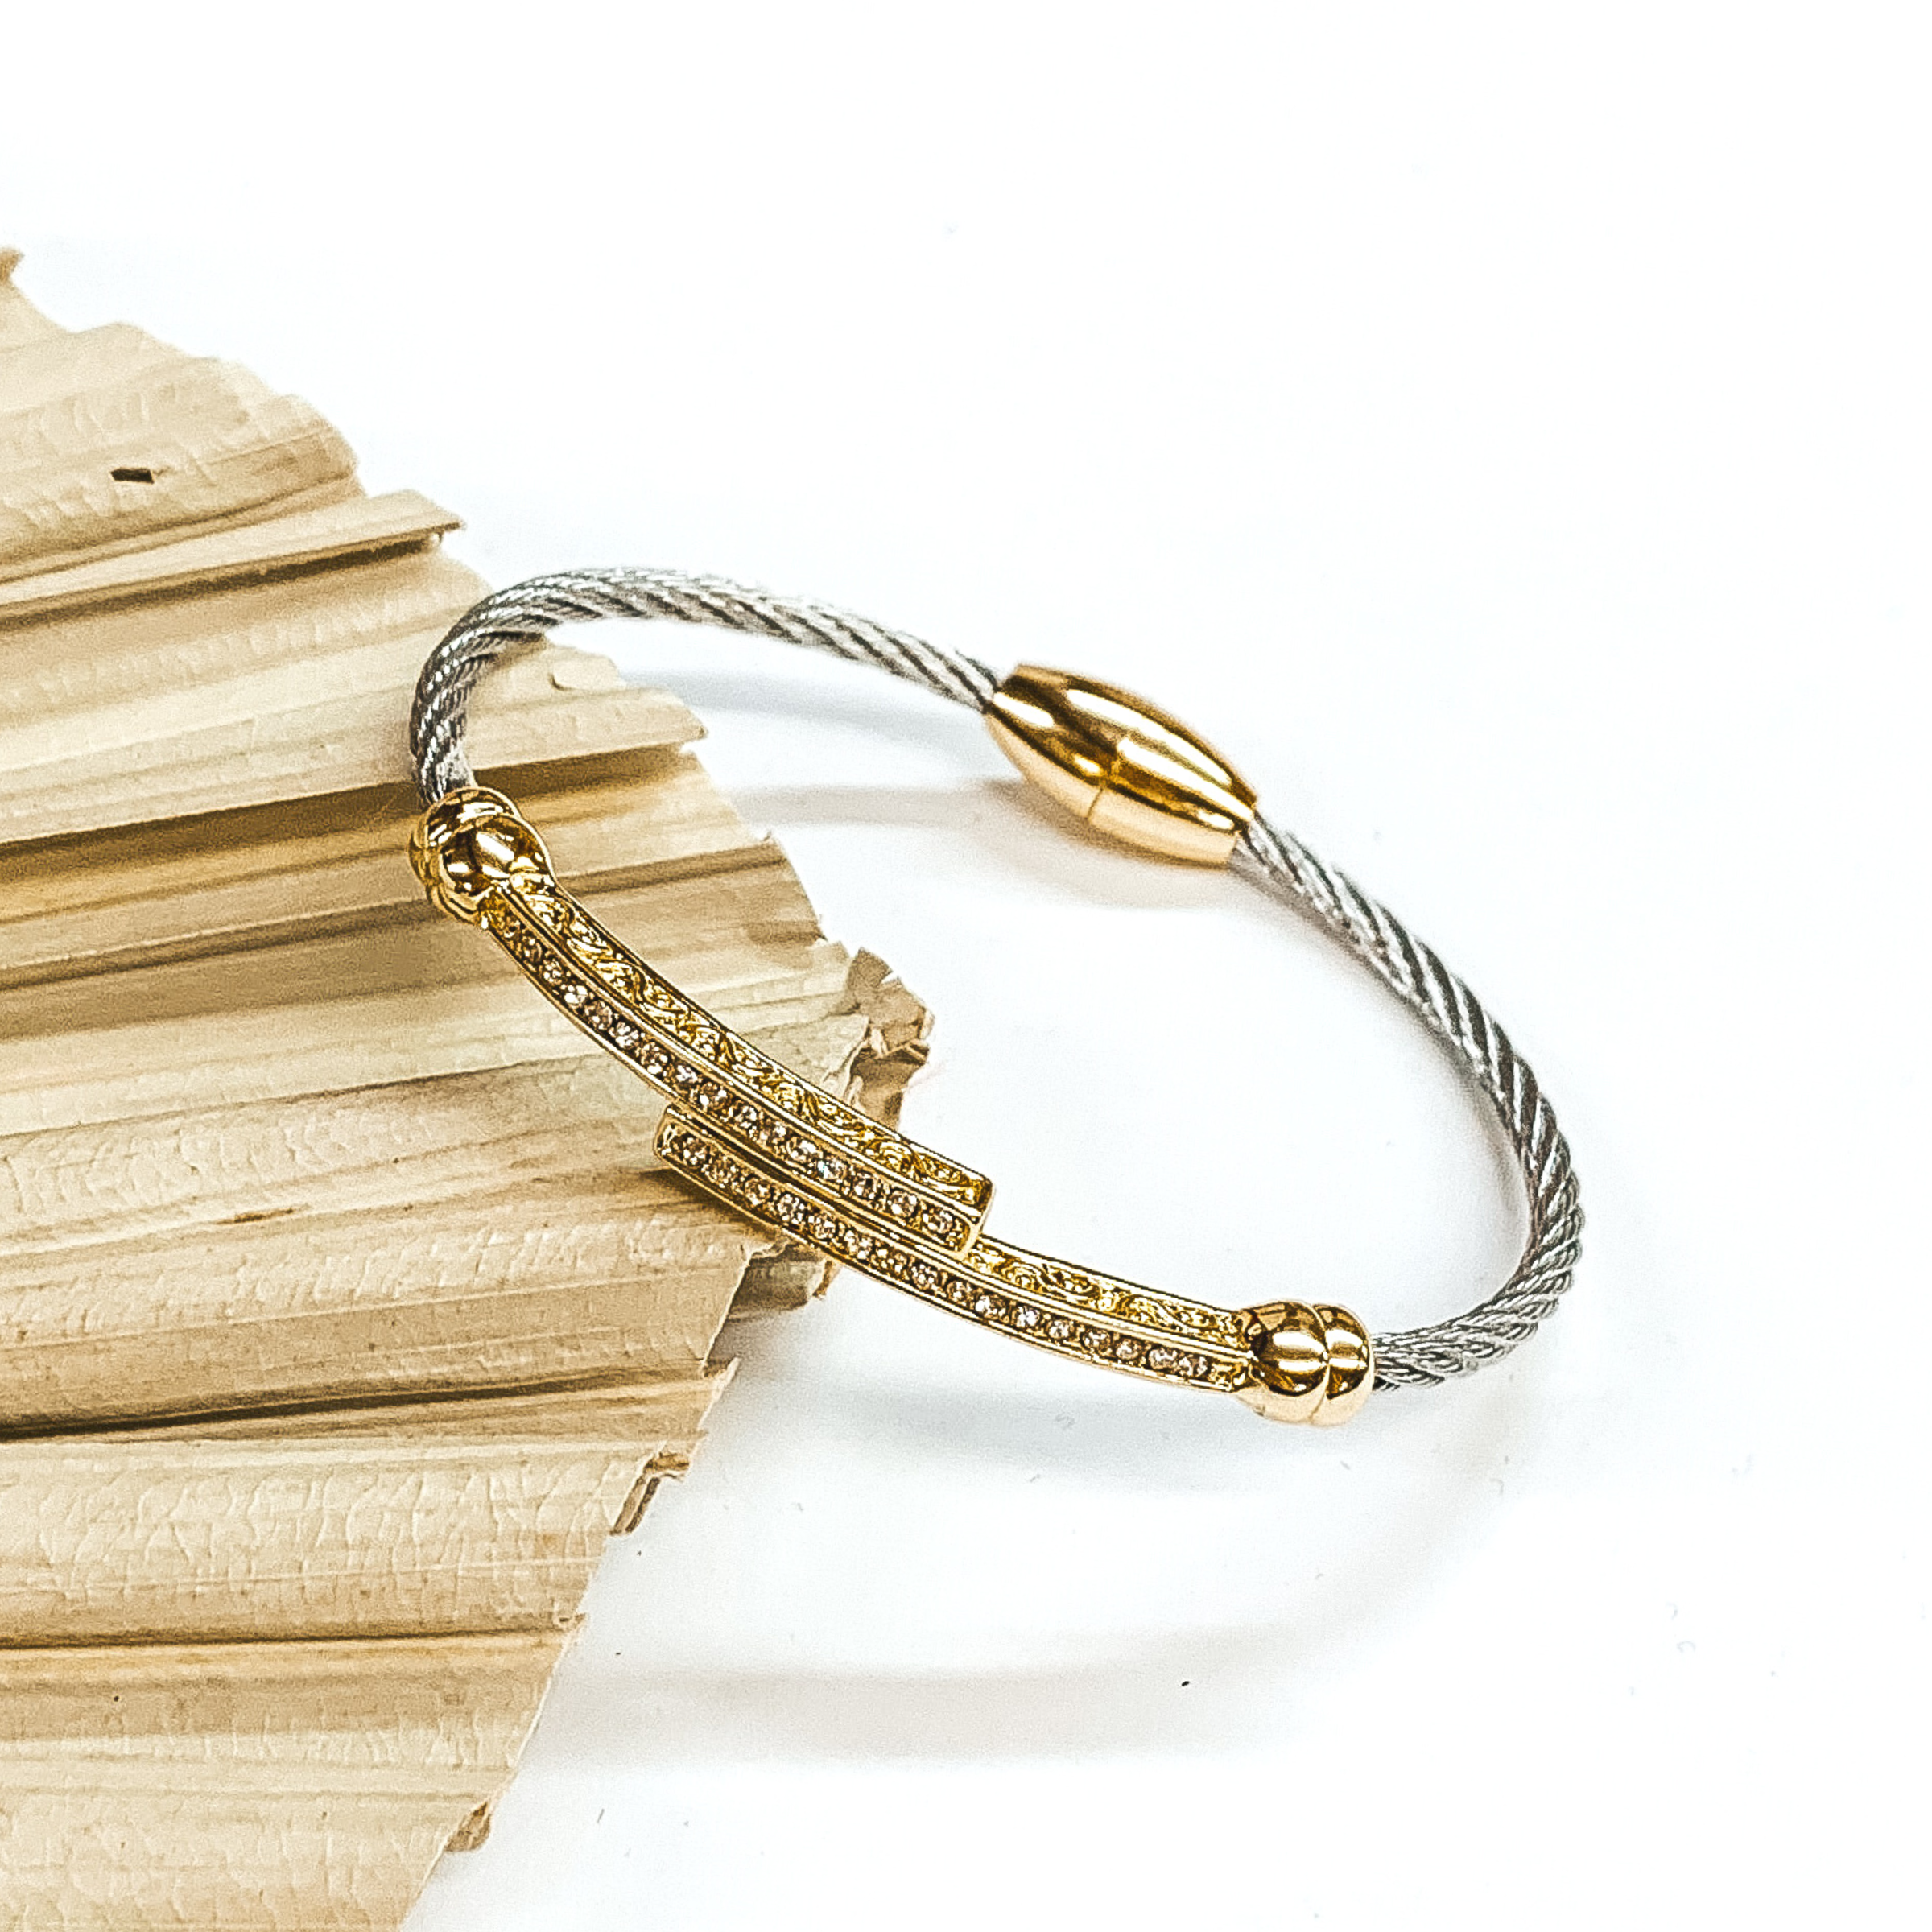 This is a silver cable bracelet with a gold magnetic clasp. It also includes two gold bar attached in the middle with clear crystals. This bracelet is pictured laying on a green palm leaf on a white background. 